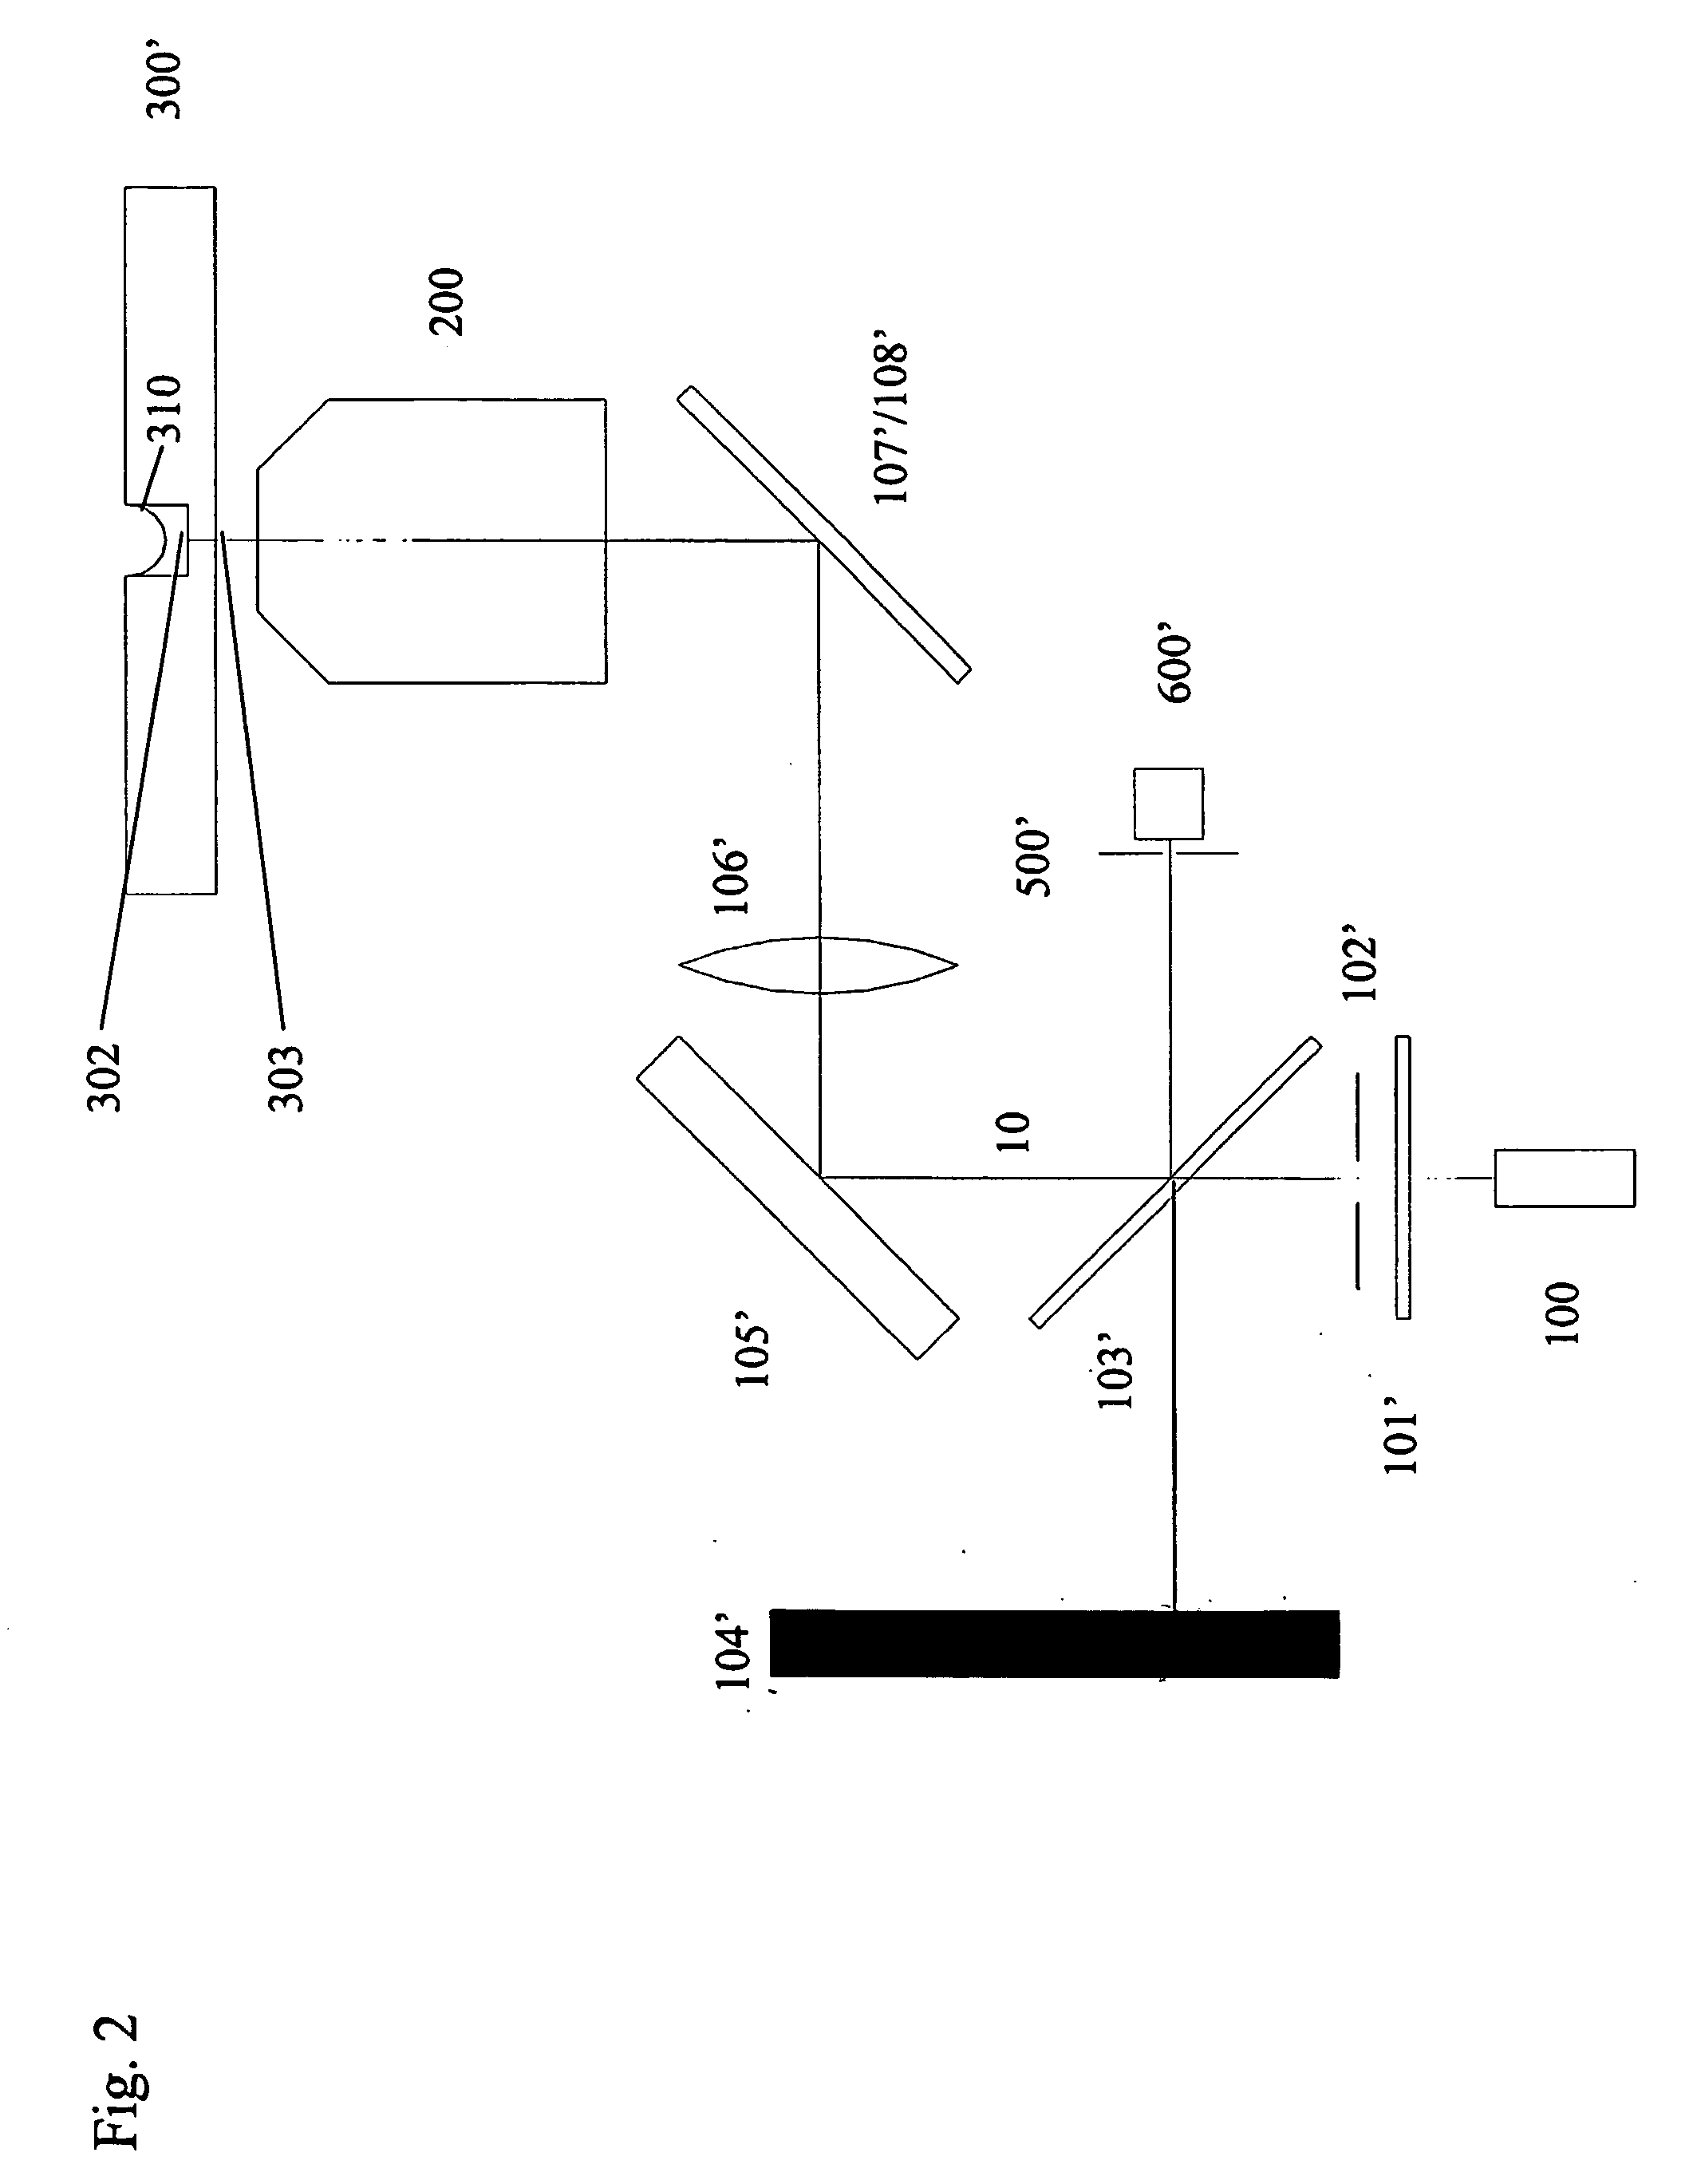 System and methods for rapid and automated screening of cells